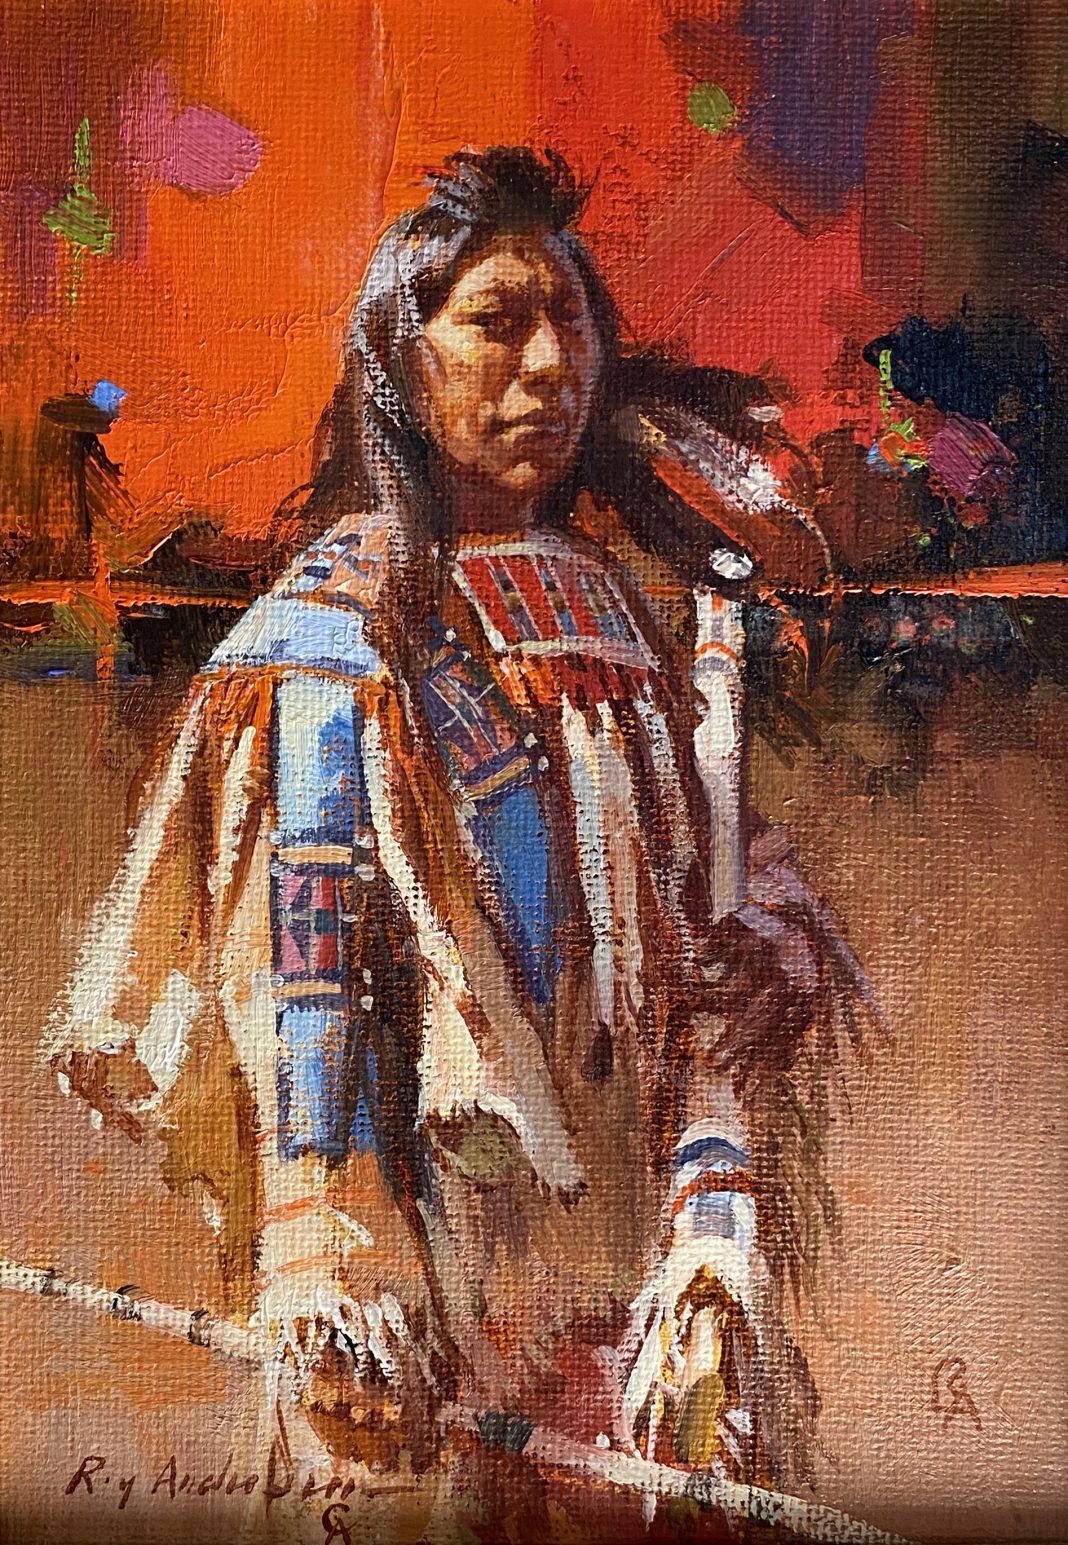 Roy Andersen The Shirt Wearer Native American Indian western oil painting portrait